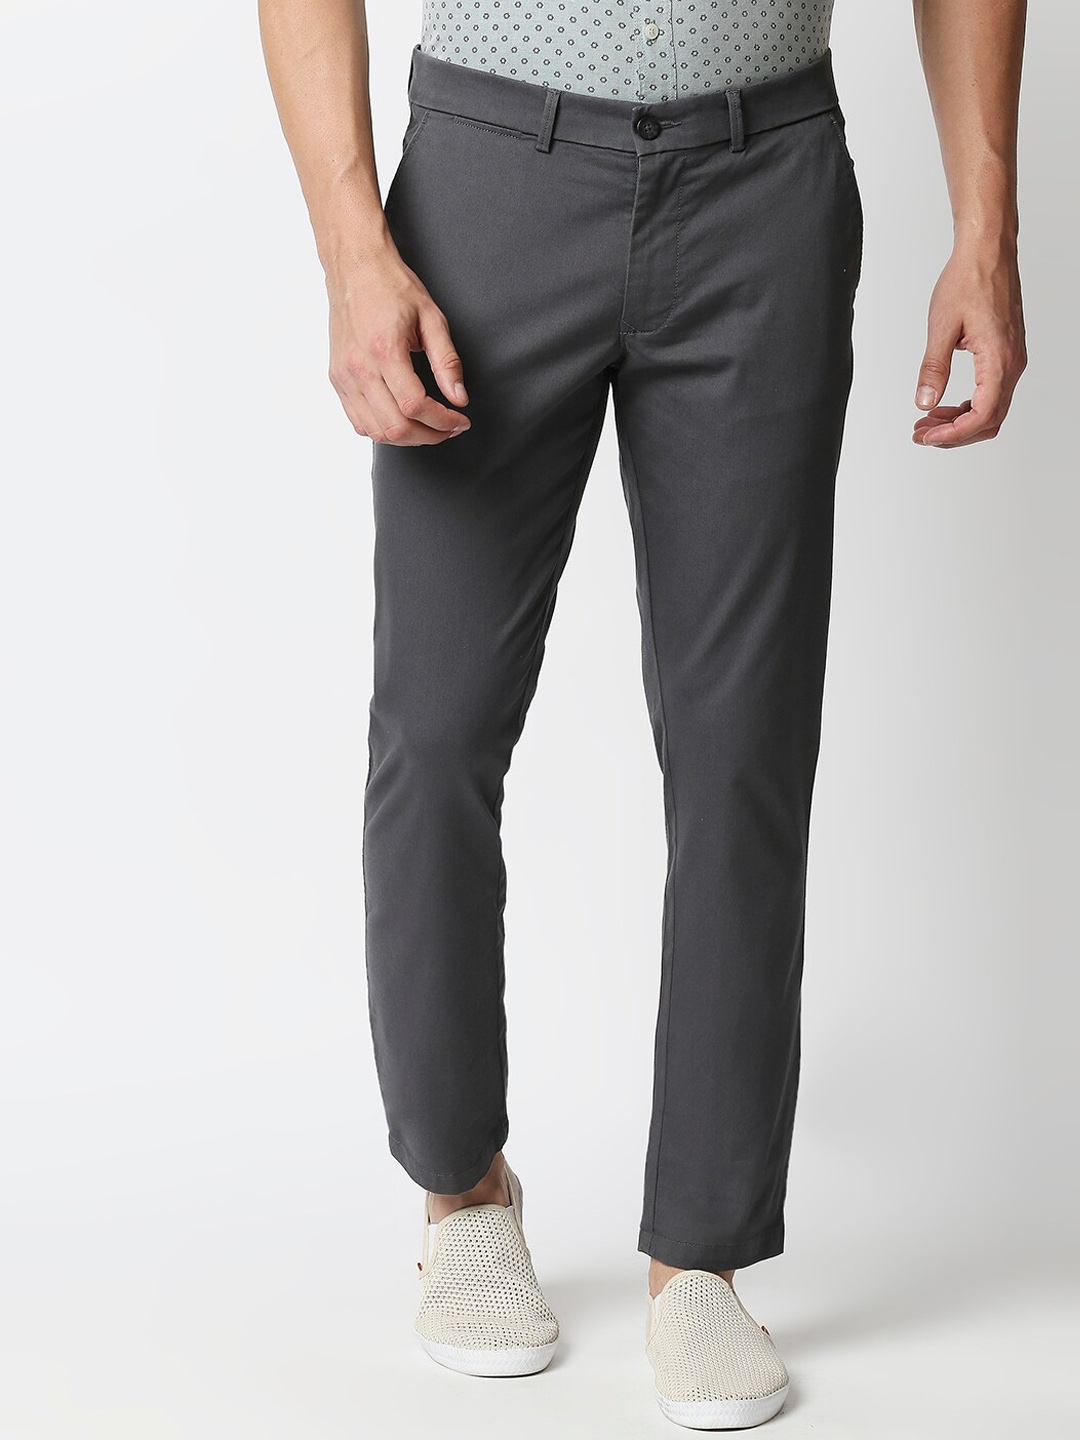 Buy Basics Men Grey Tapered Fit Cotton Trousers - Trousers for Men ...